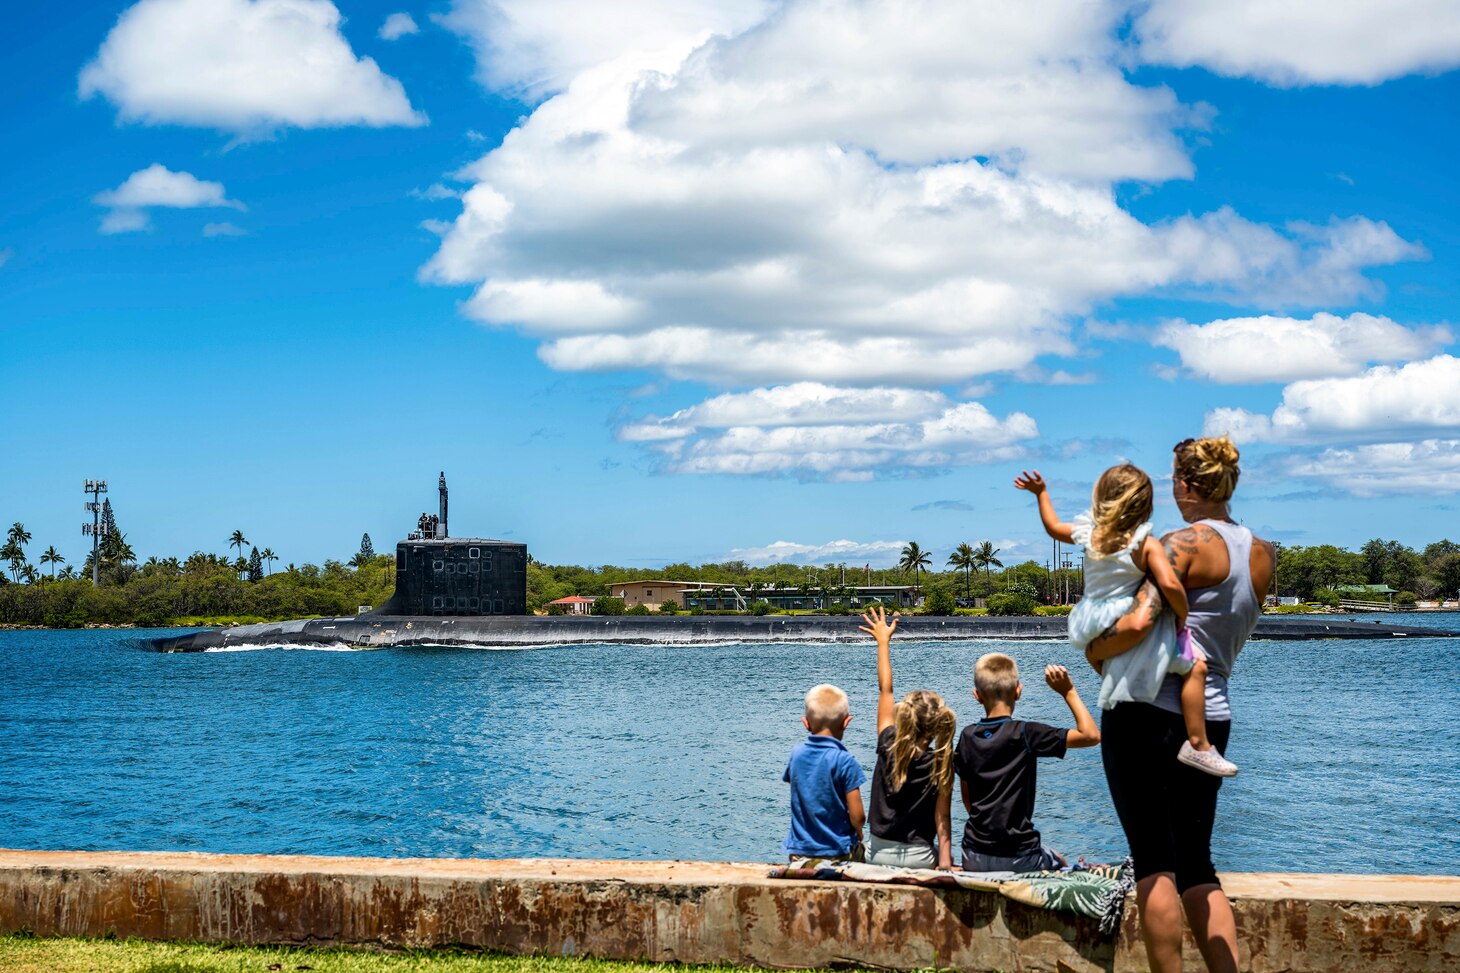 A submarine sails in blue waters as an adult and four young children watch and wave from the shore.